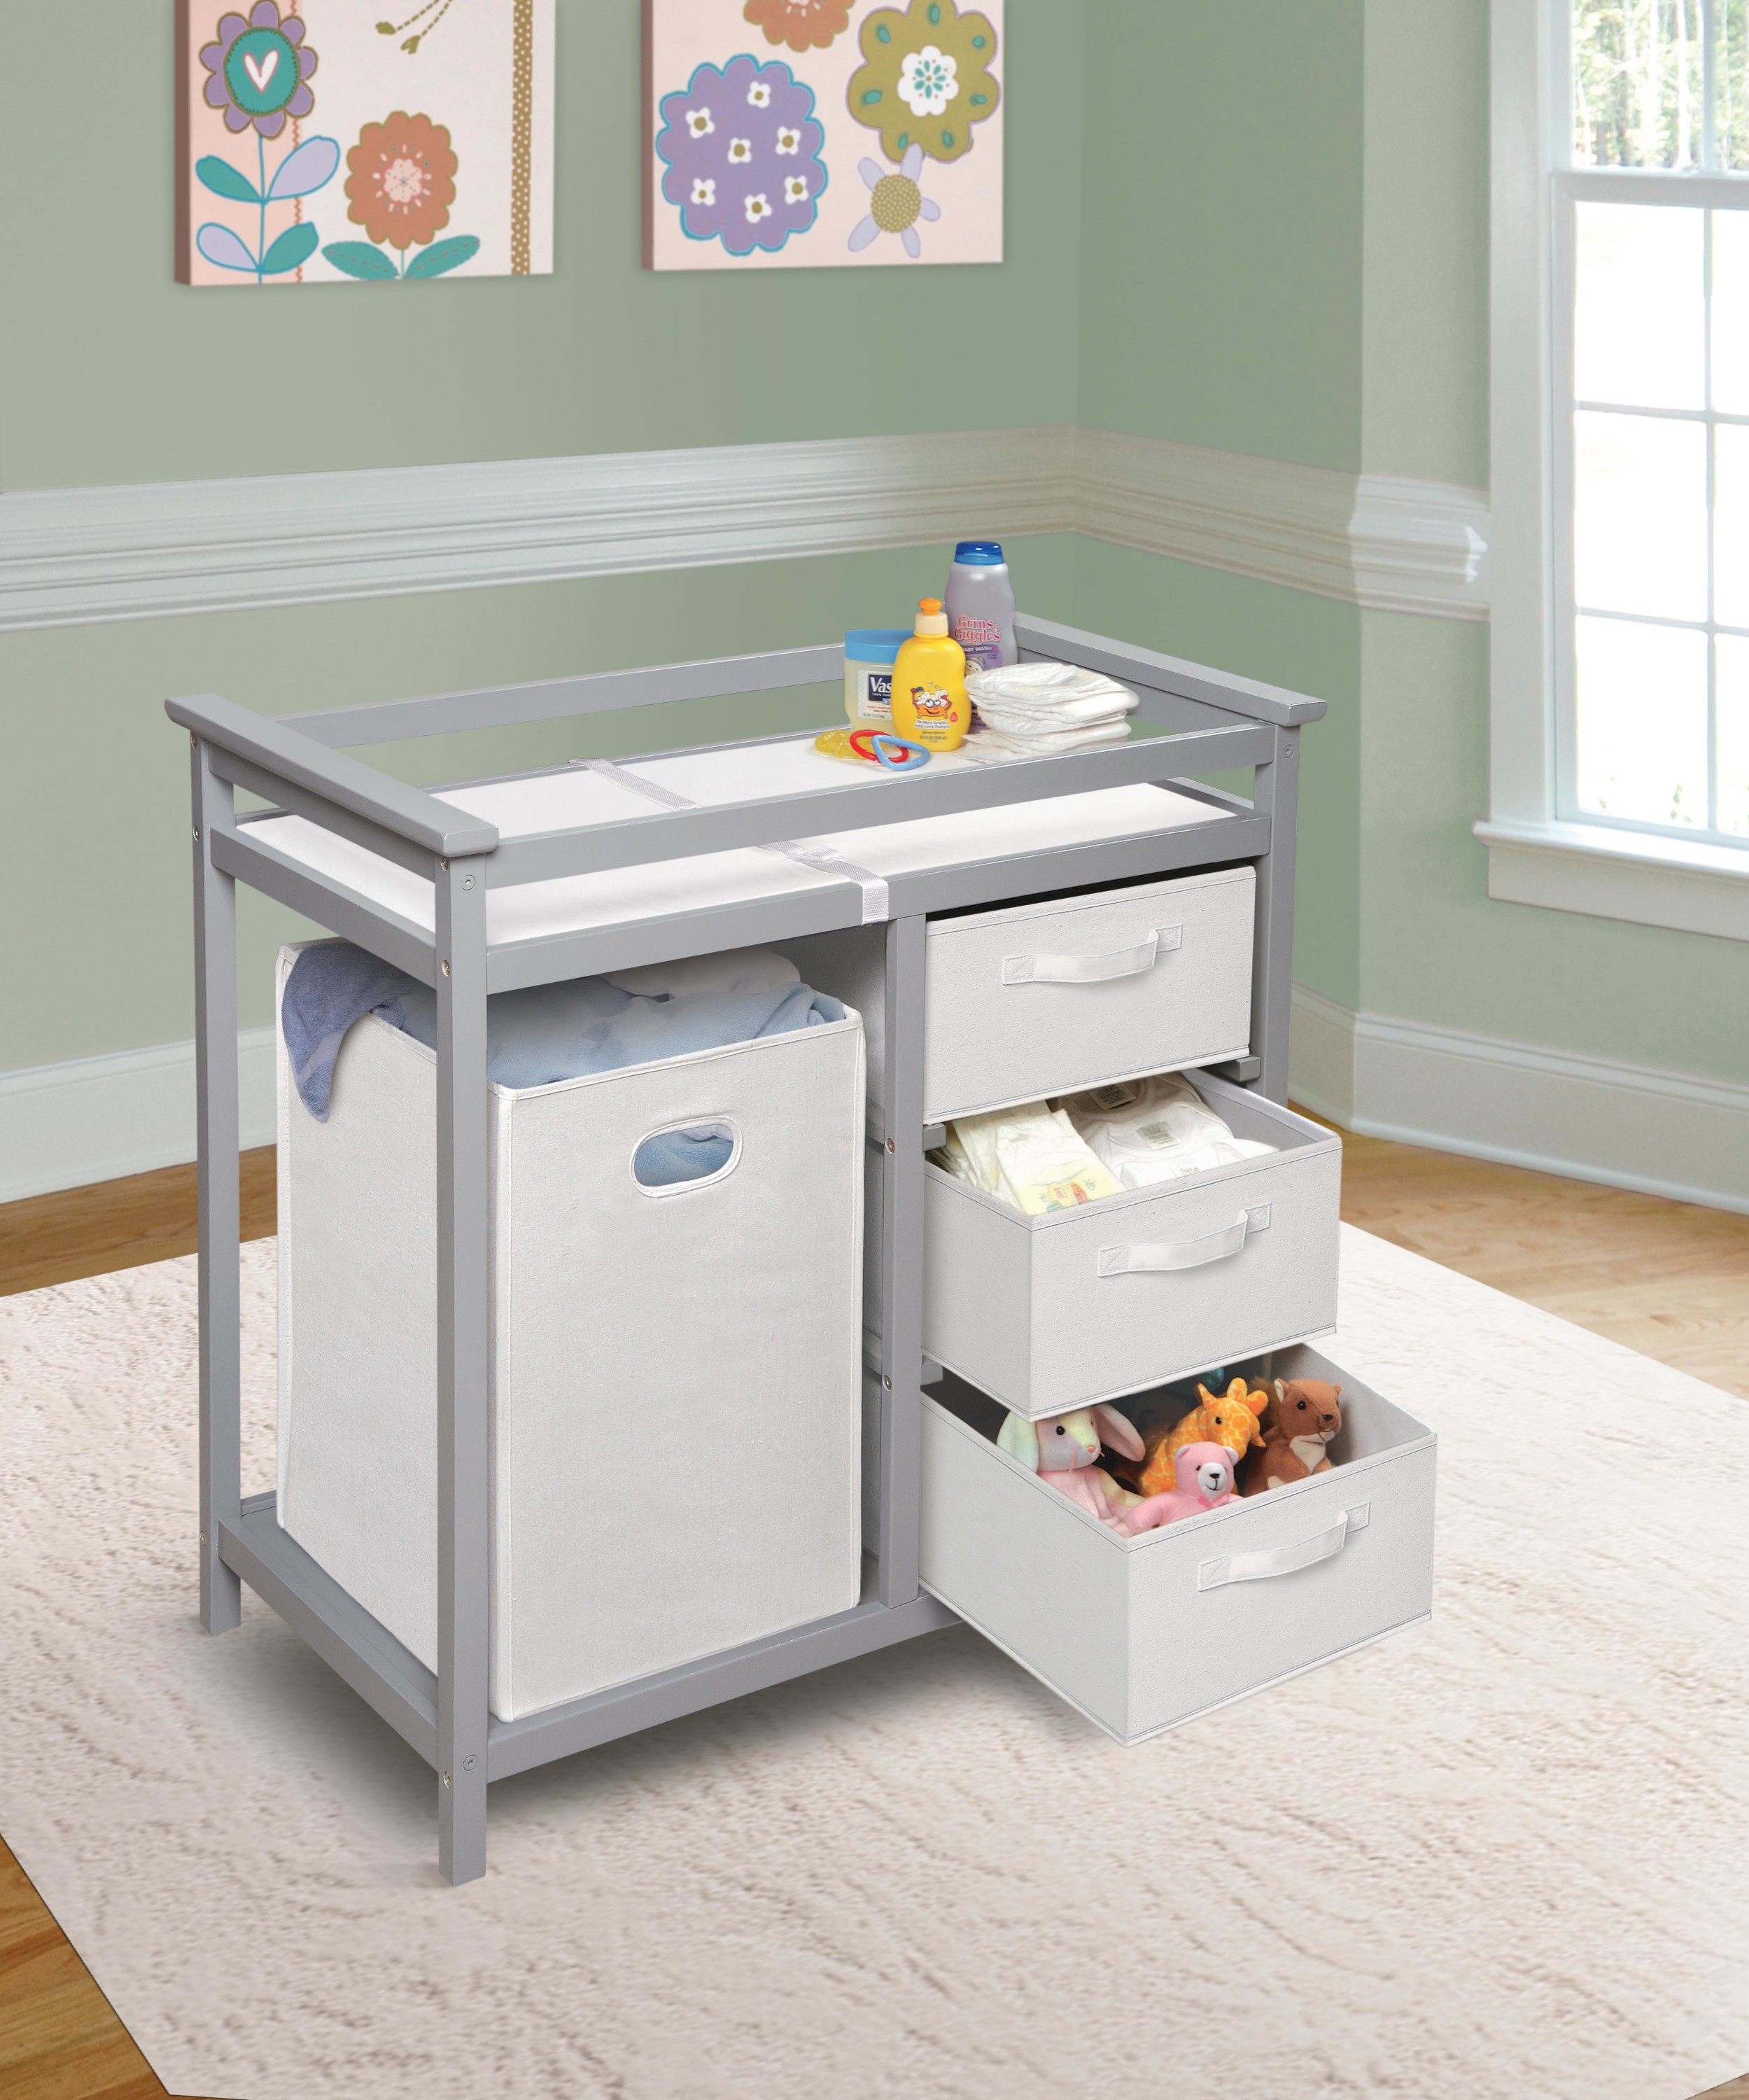 Badger Basket Modern Baby Changing Table with Hamper and 3 Baskets - Gray - image 3 of 10